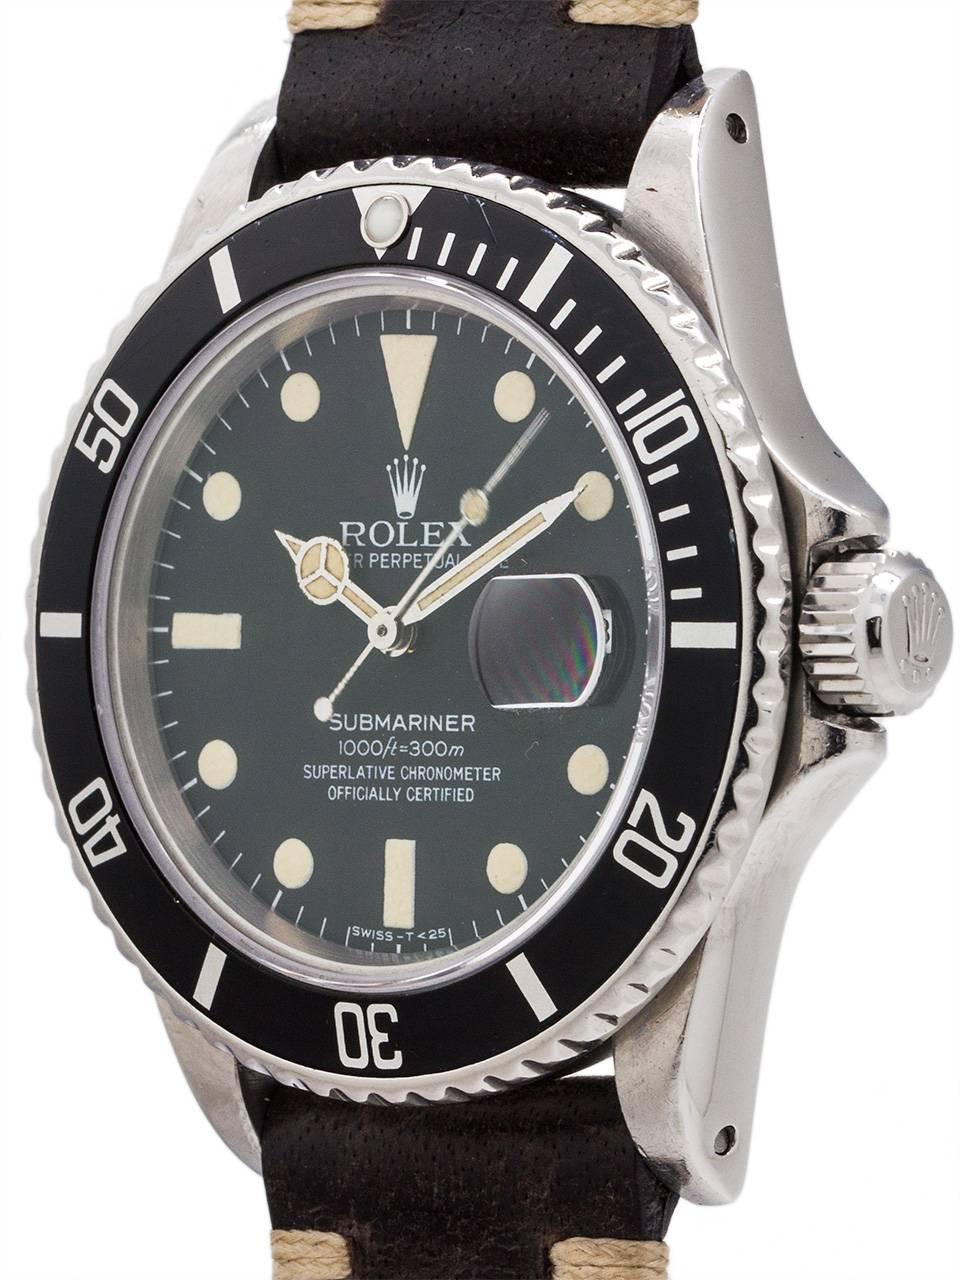 
Rolex Submariner ref 16800 transitional model serial# 7.2 million circa 1982 with matte black dial with richly patina’d luminous indexes, hands, and pearl. This is the popular transitional model with sapphire crystal, quickset date calibre 3035